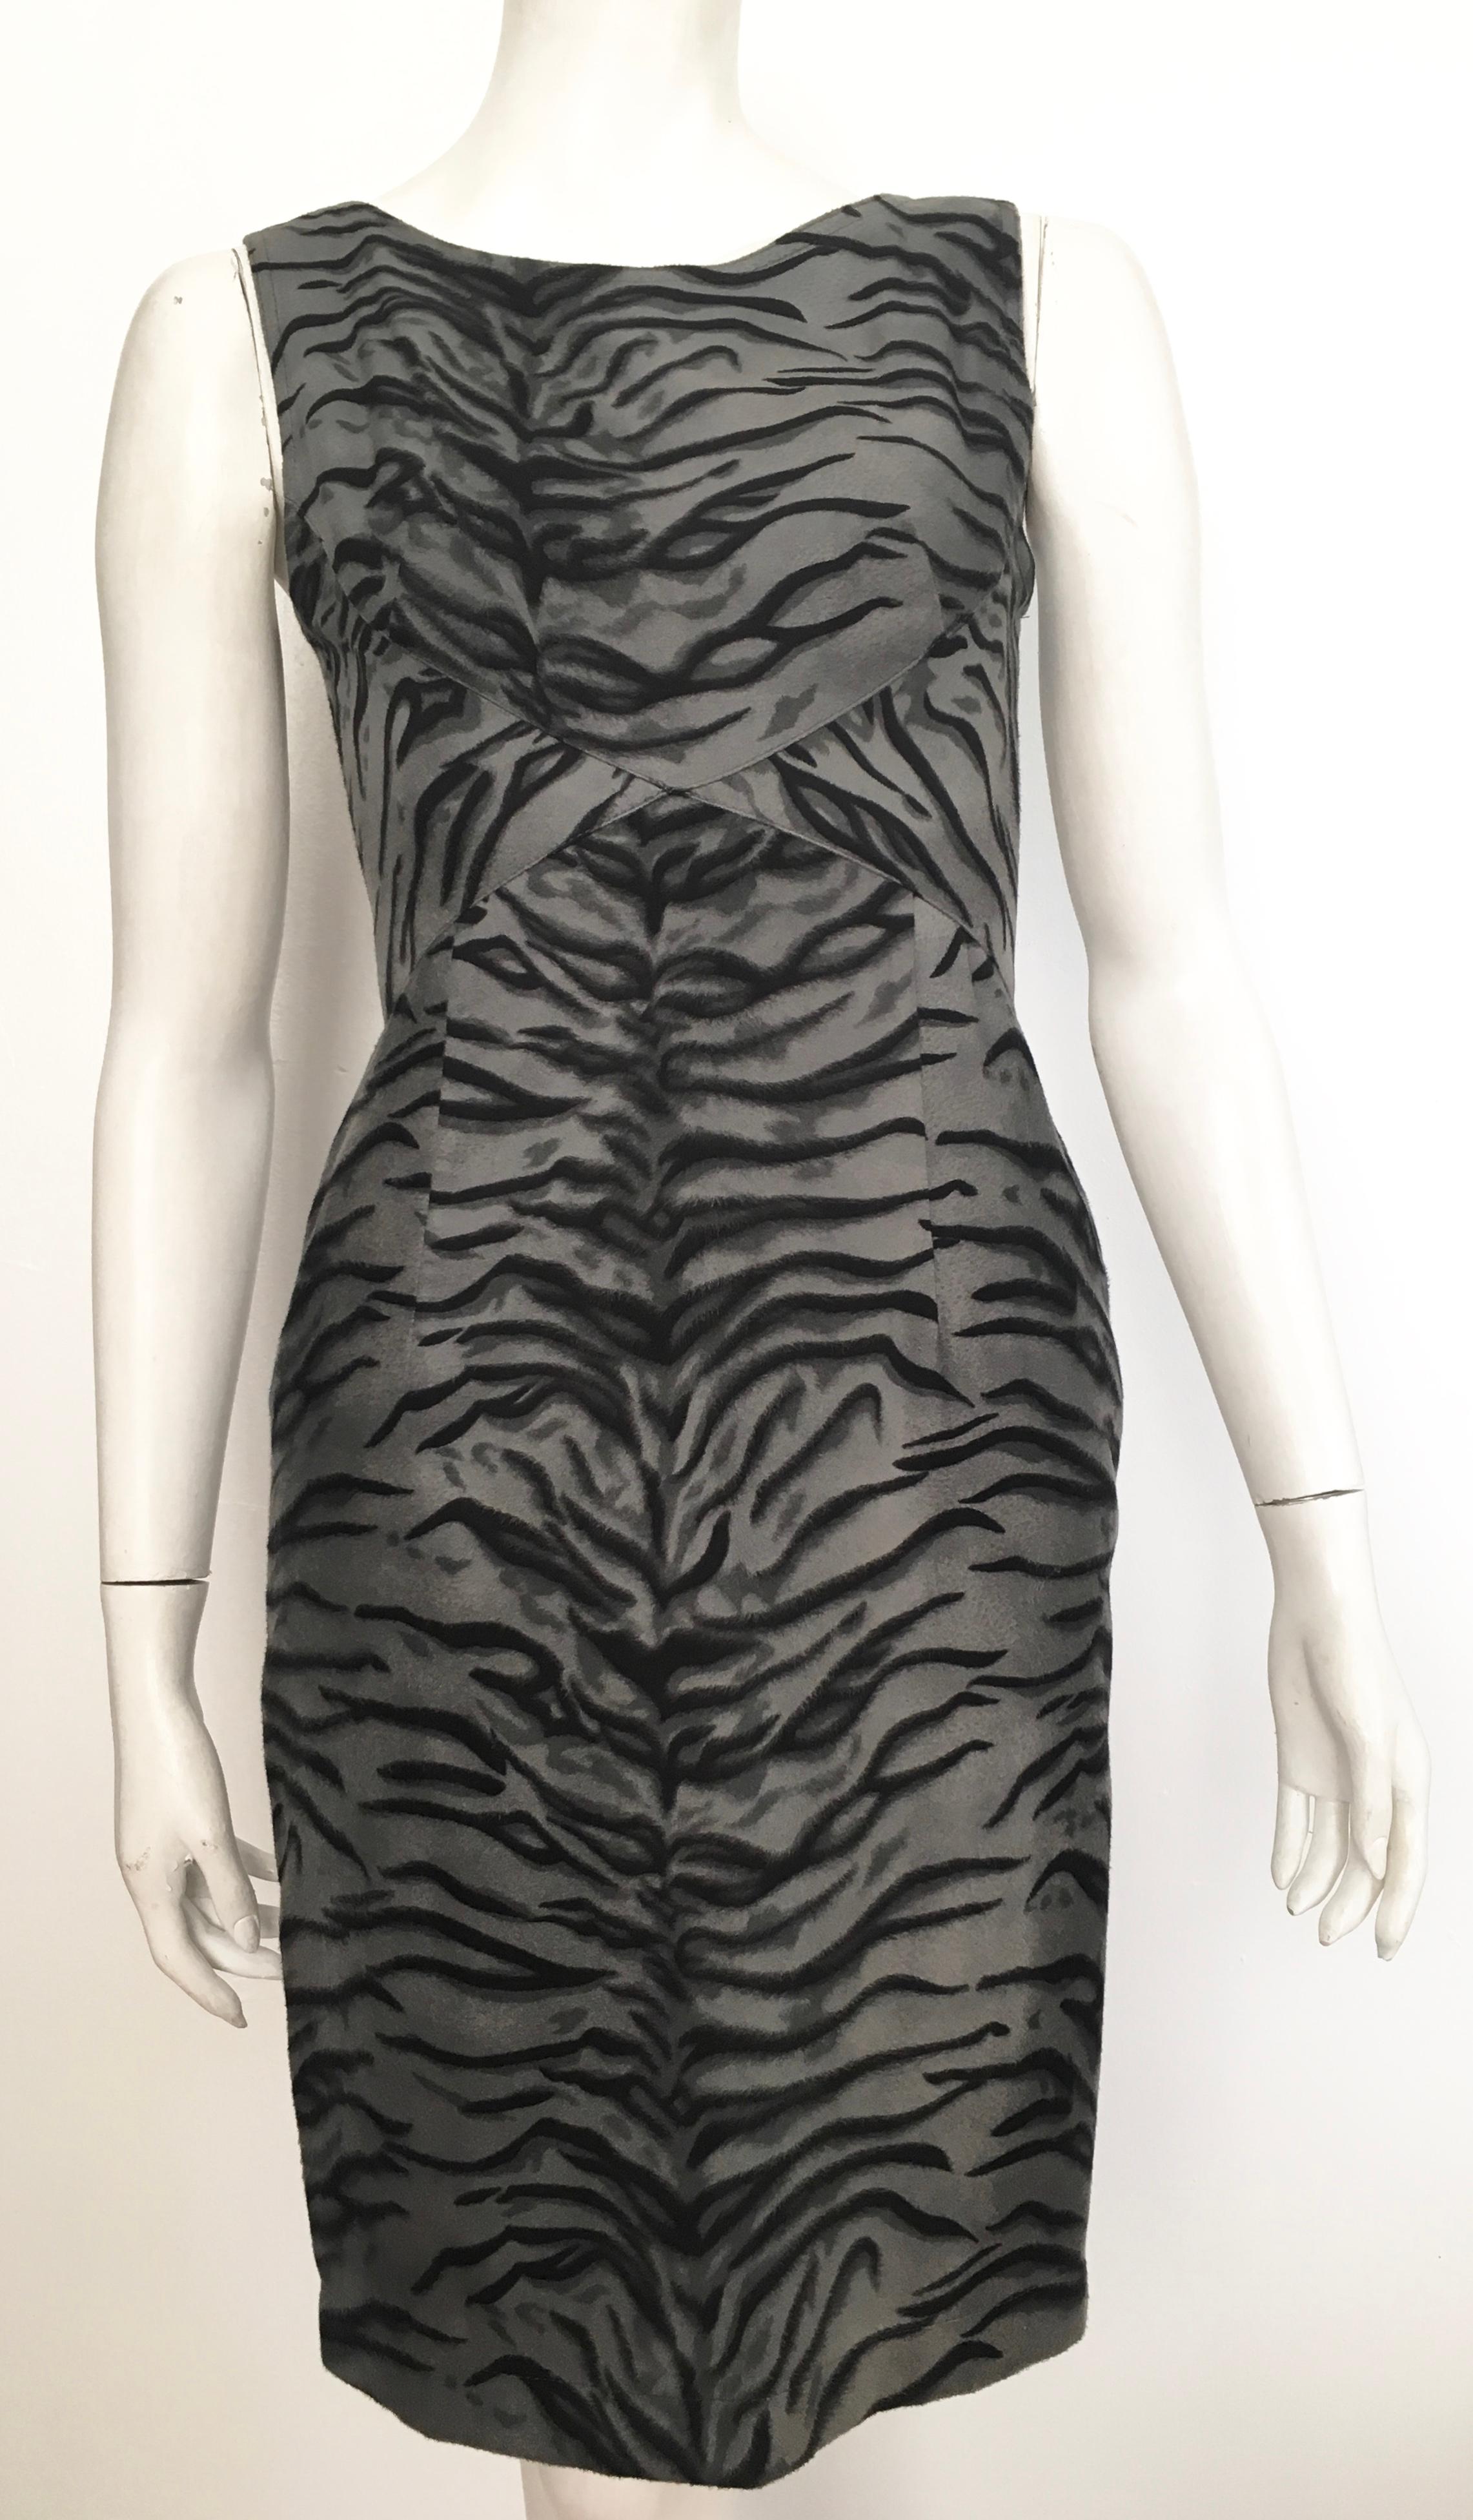 Moschino gray tiger print sleeveless dress is labeled a USA size 8 but it is a size 4.  The waist on this dress is 27. 1/2